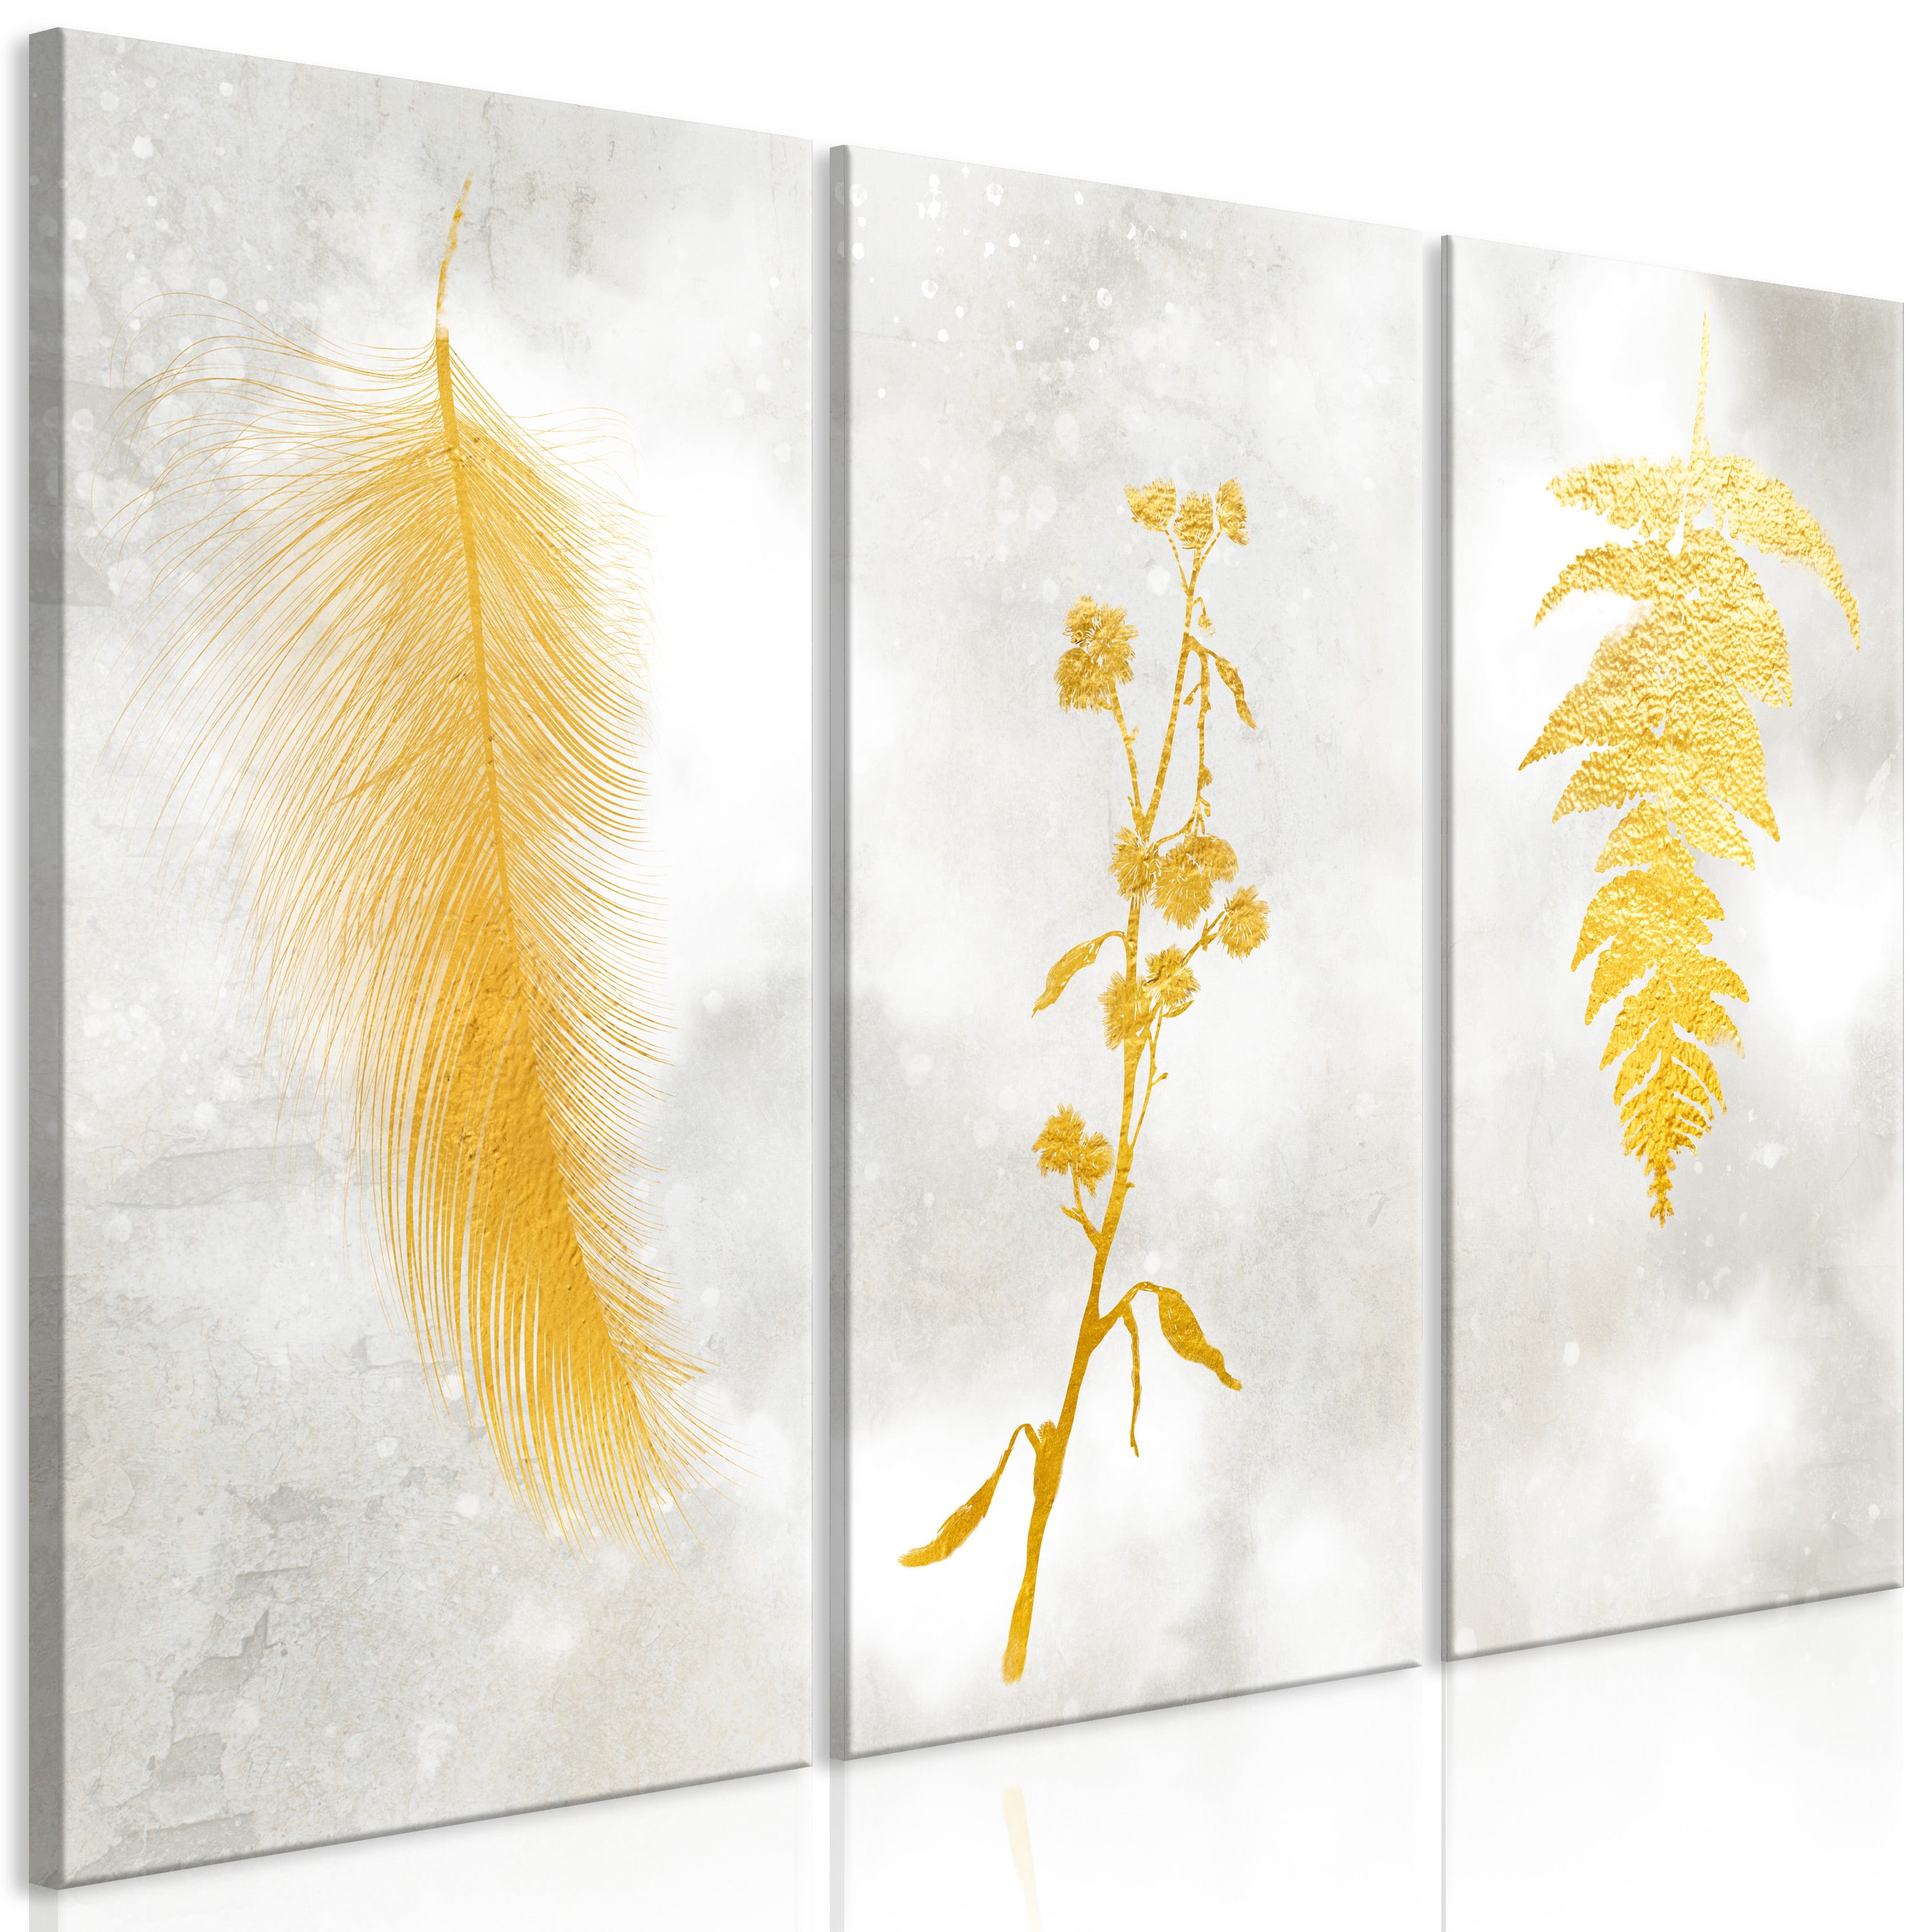 Botanical Canvas Wall Art - Delicate Chic - 3 Pieces